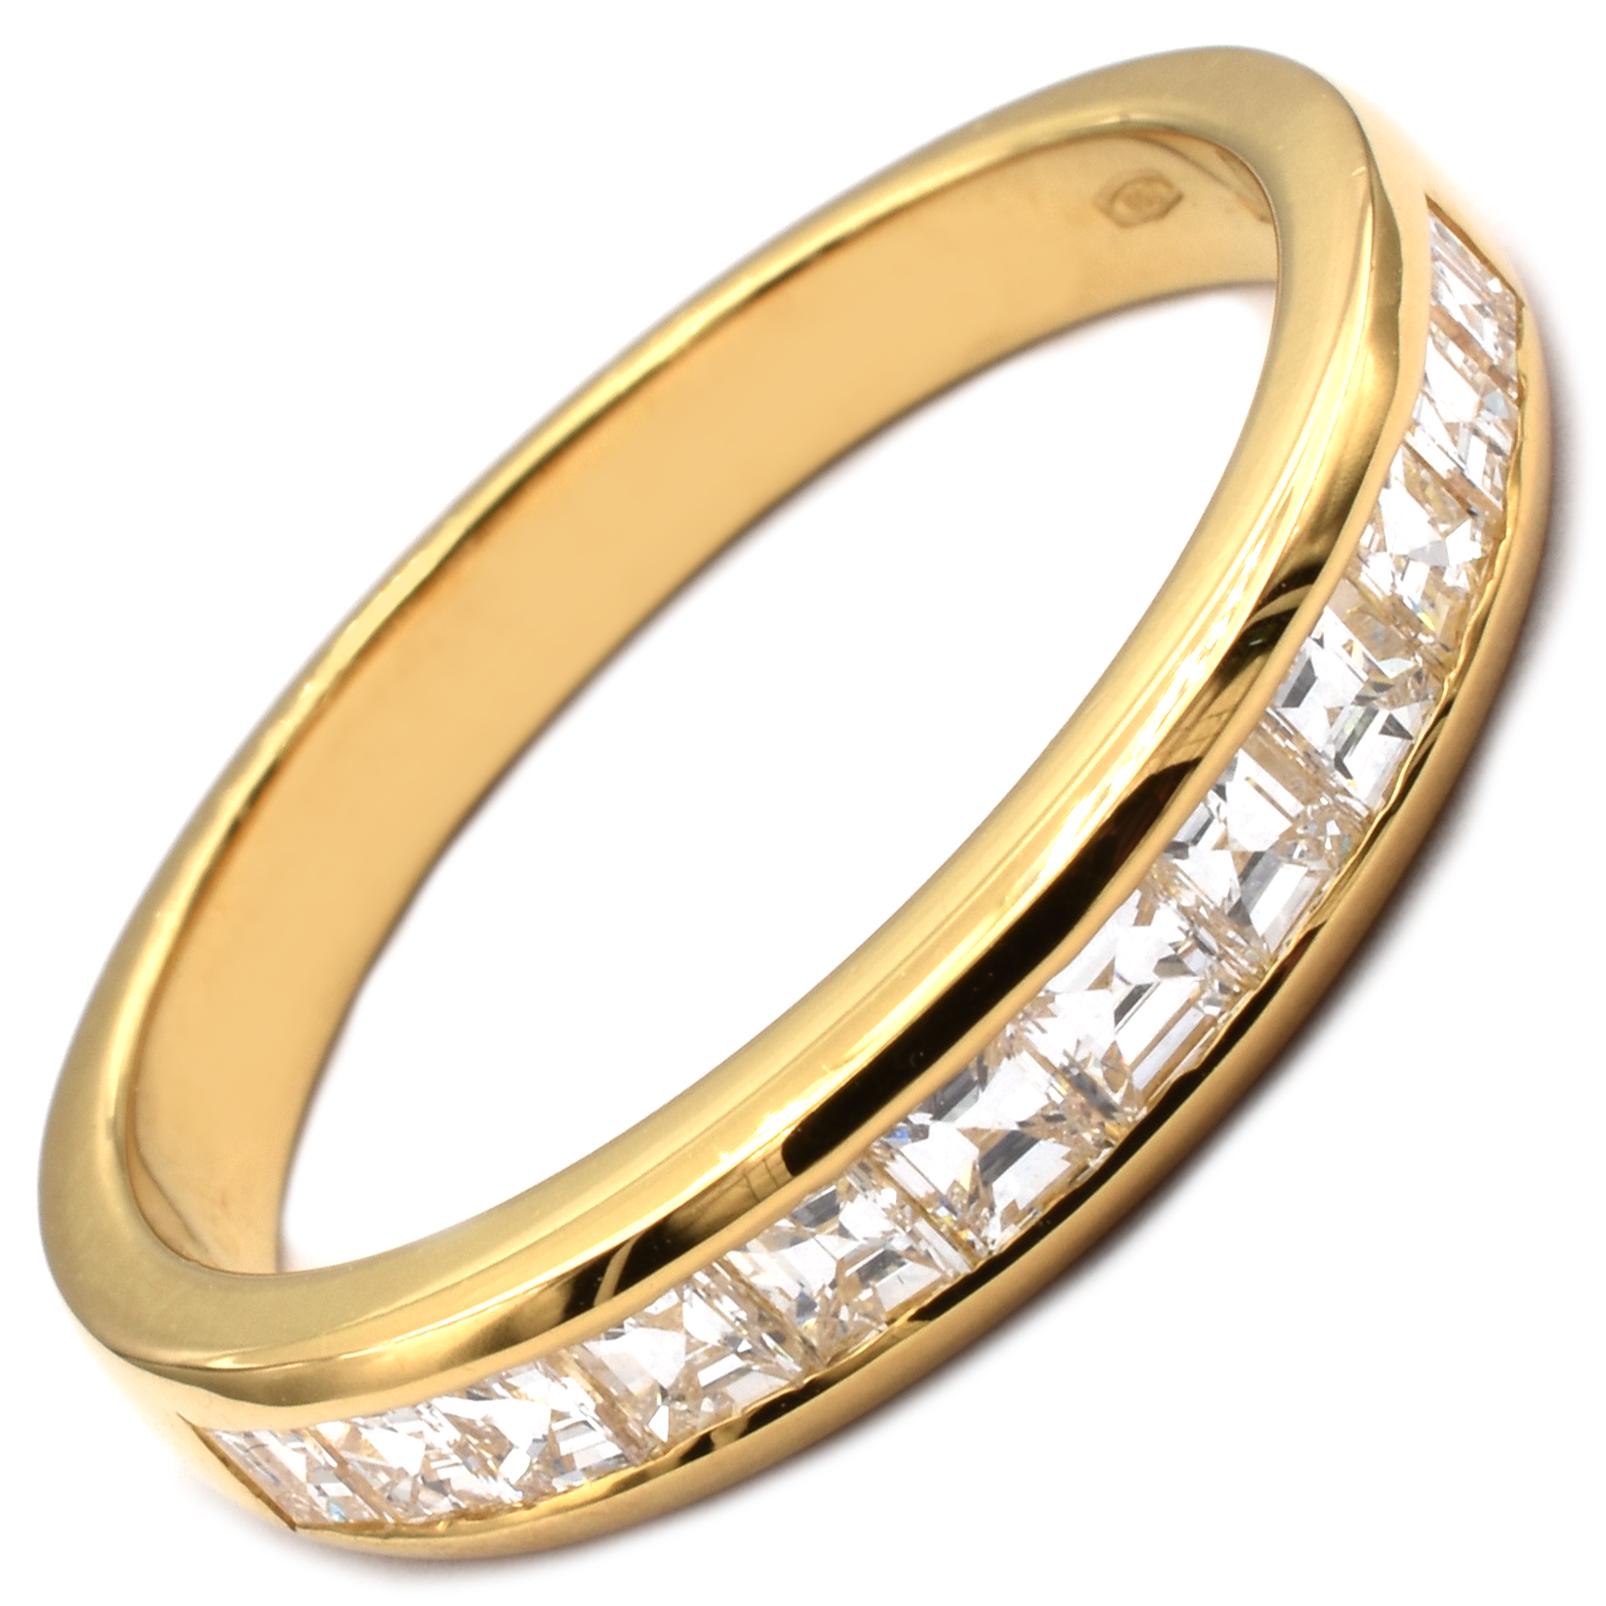 Gilberto Cassola 18Kt Yellow Gold Half Eternity Ring with Square Cut Diamonds.
Handmade in Italy in Our Athelier in Valenza (AL).
18Kt Gold g 4,10
F Color VVS Clarity Square Cut Diamonds Total Weight ct 0.77
This Ring is a Regular Size 53 (EU) and